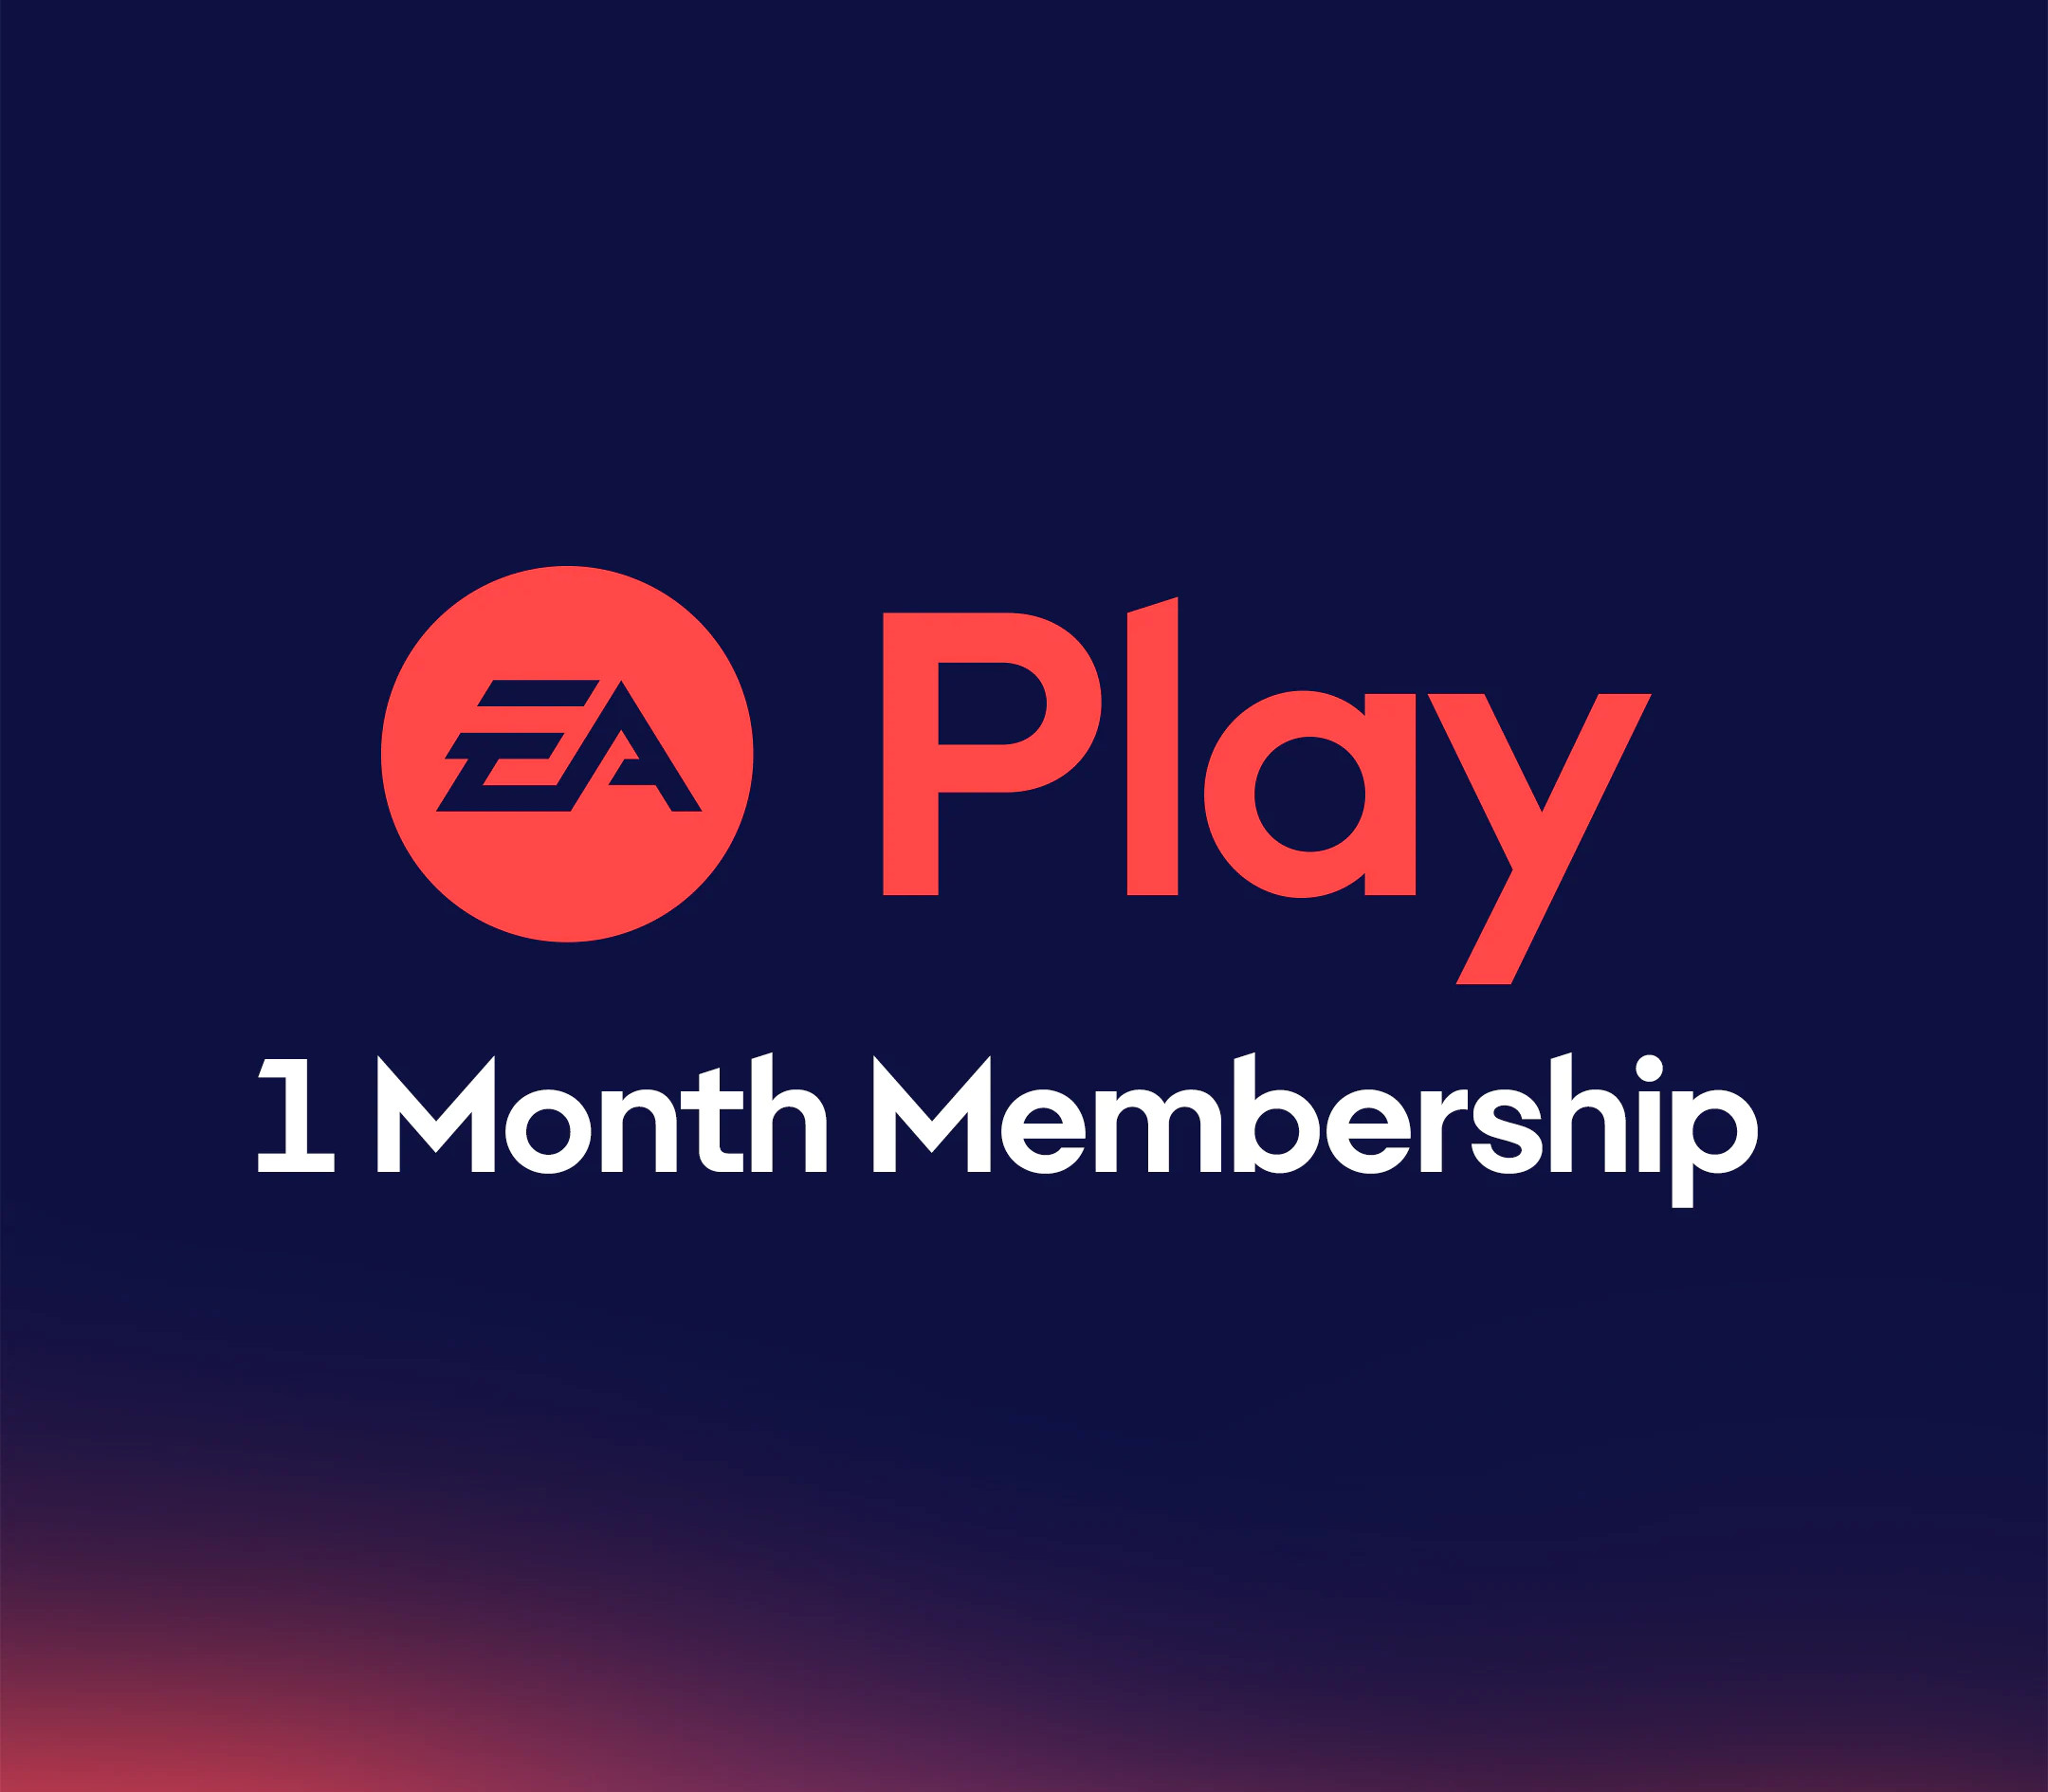 EA Play - 1 Month Subscription Key